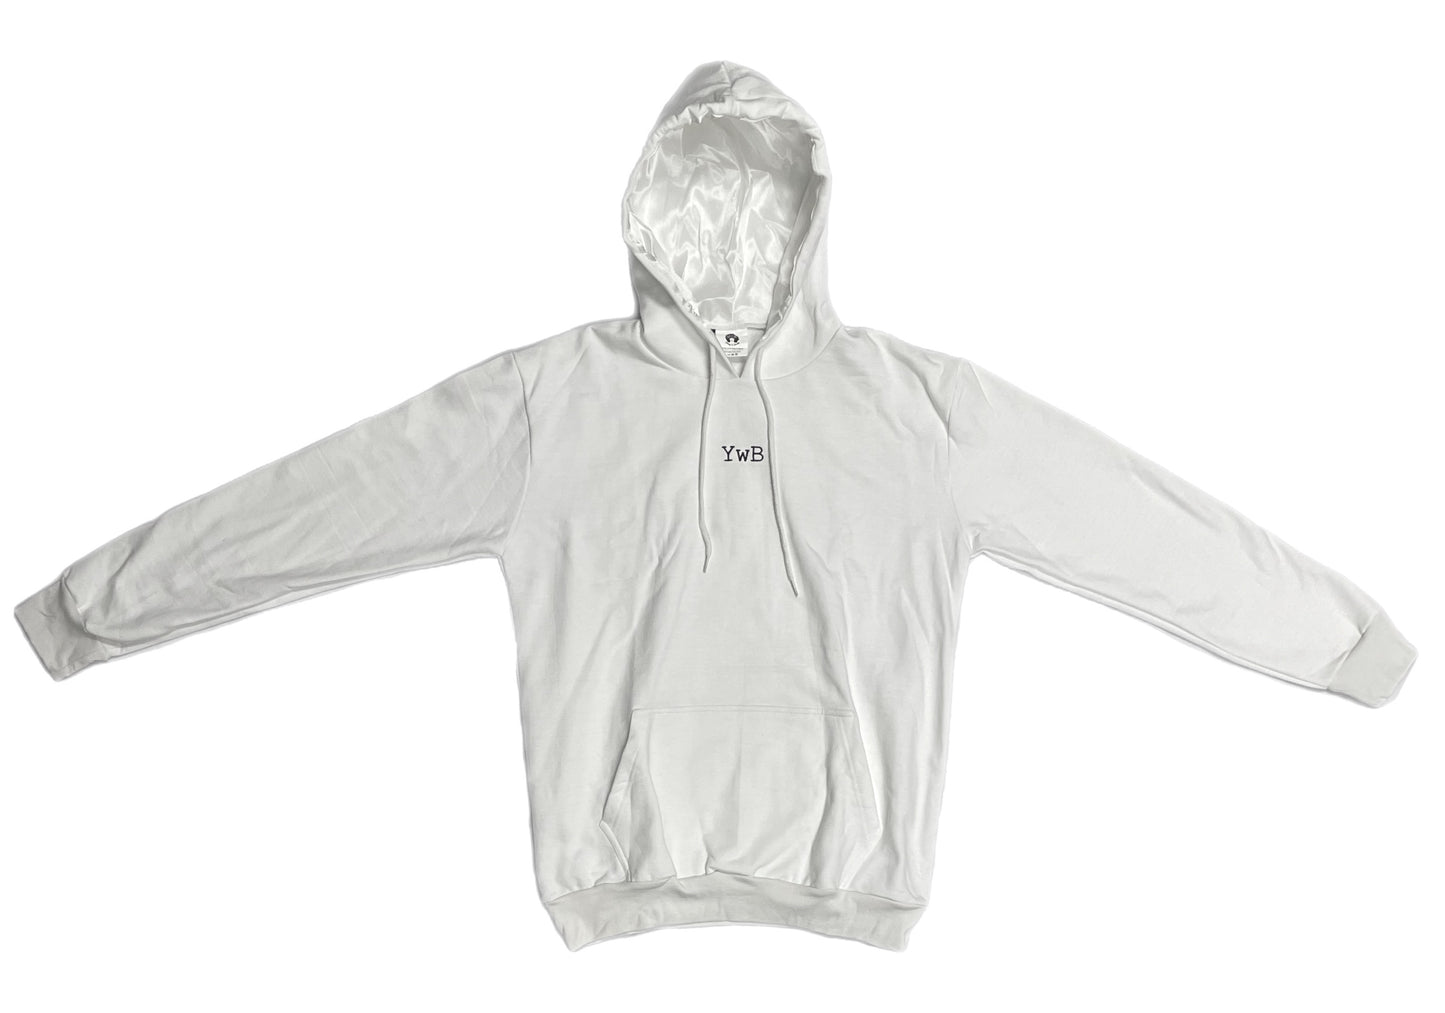 Rep the YwB White Satin Lined Hoodies